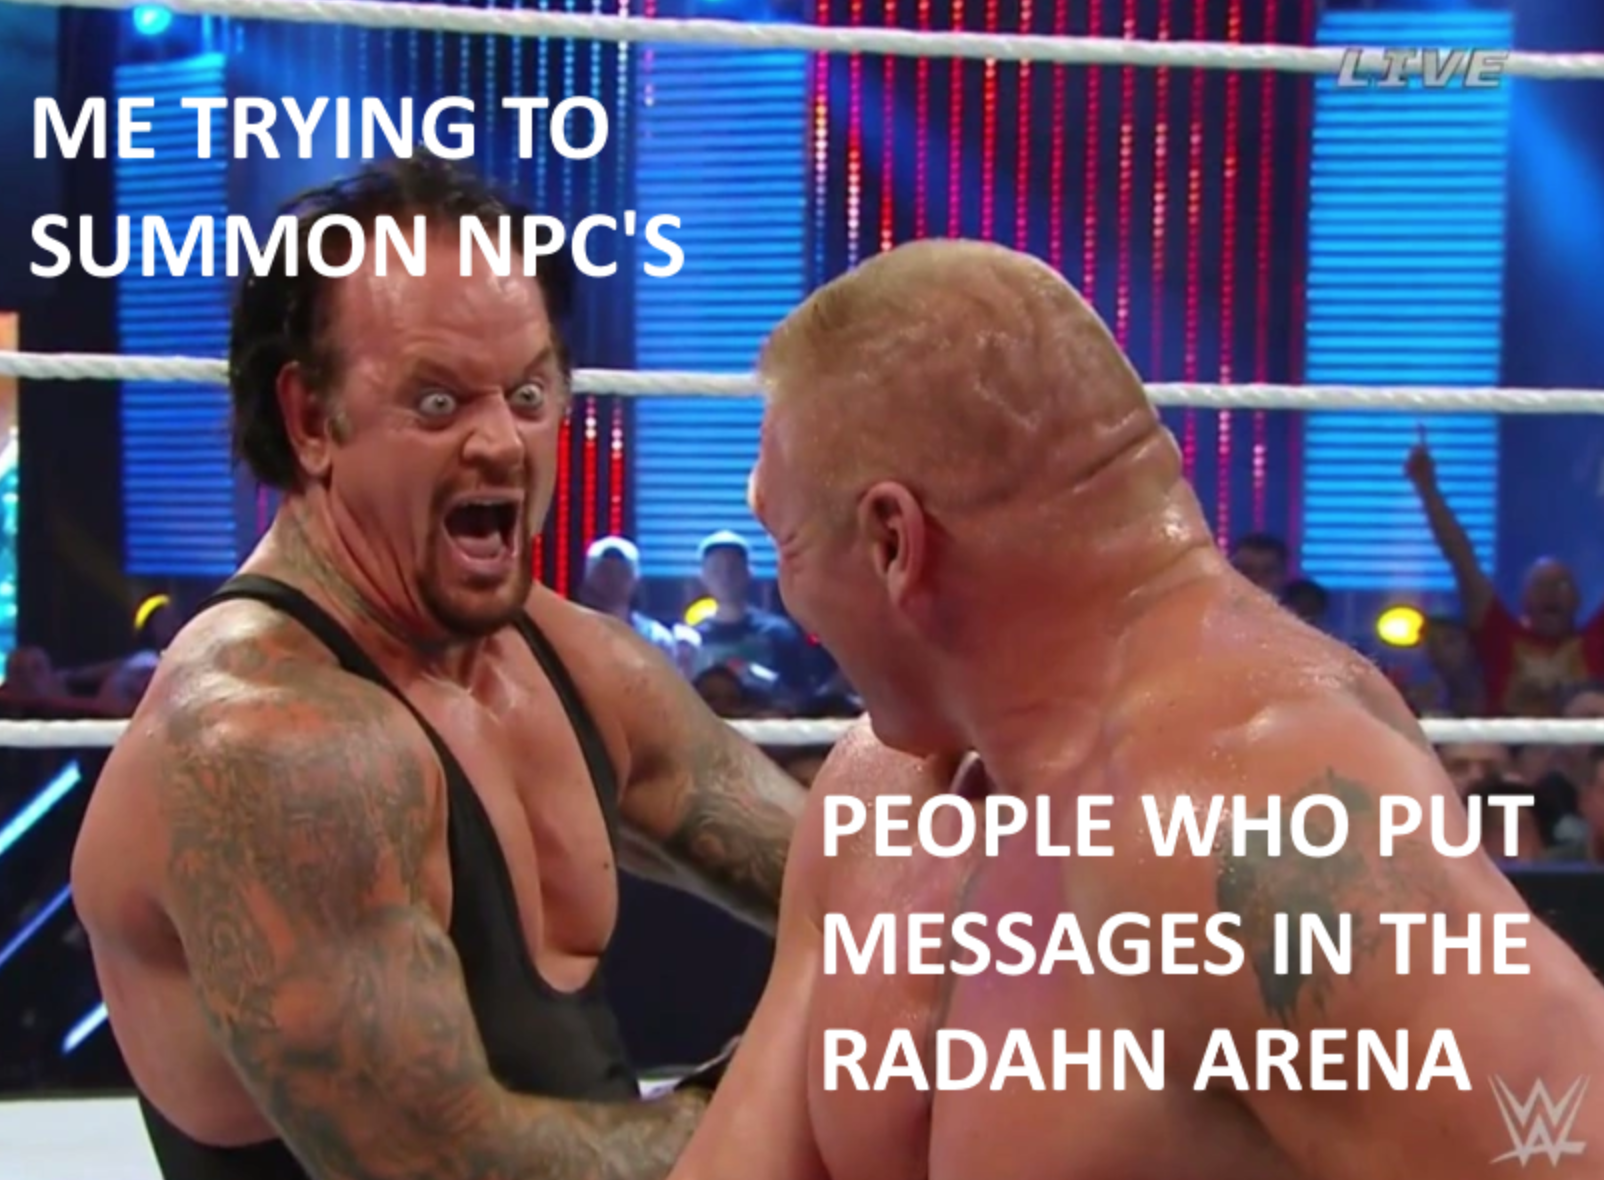 elden ring memes - undertaker laugh - Ltve Me Trying To Summon Npc'S People Who Put Messages In The Radahn Arena